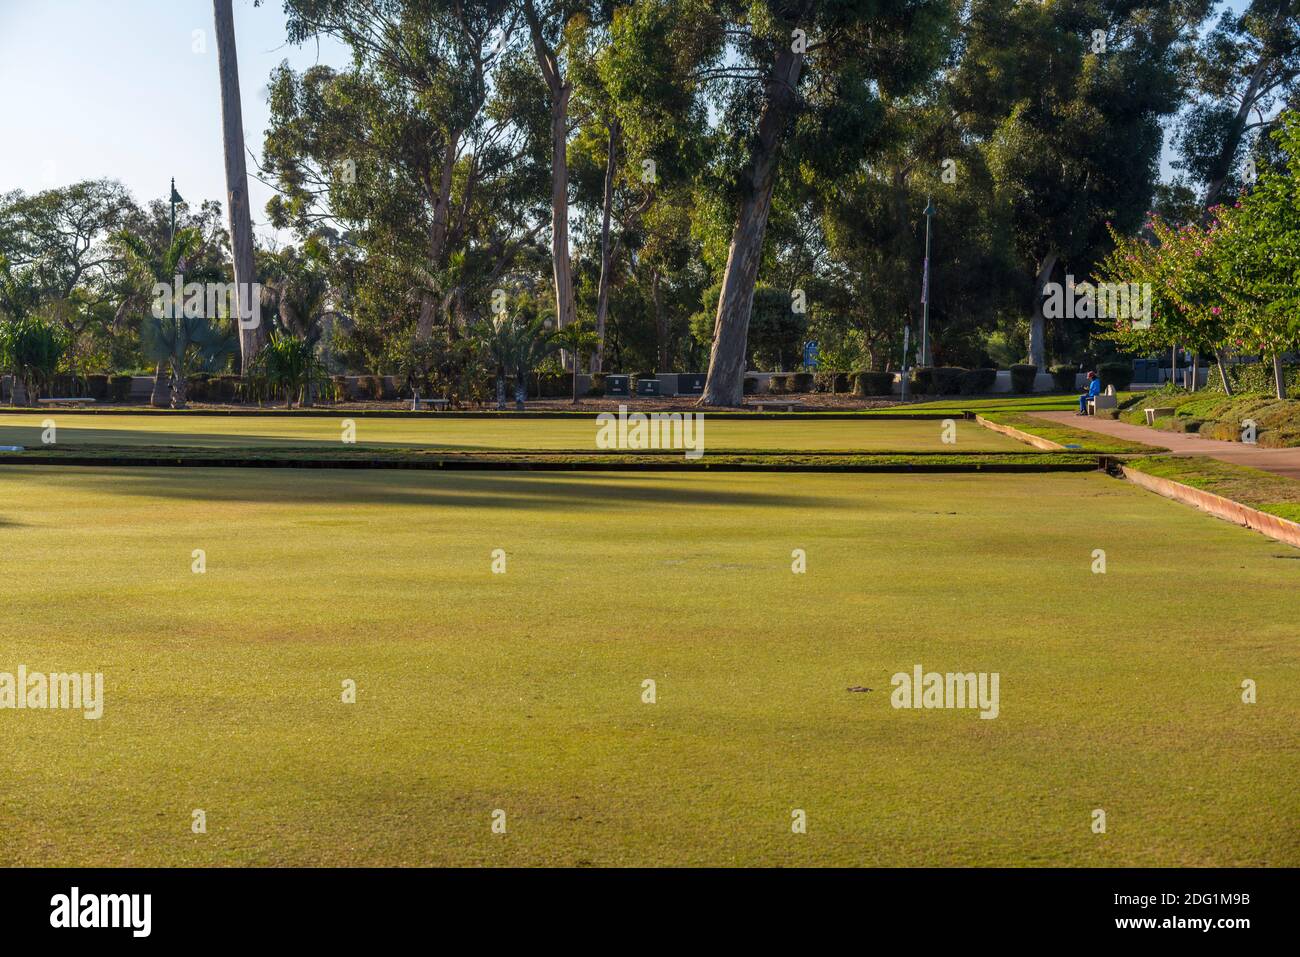 The Lawn Bowling area at Balboa Park. San Diego, CA, USA. Stock Photo